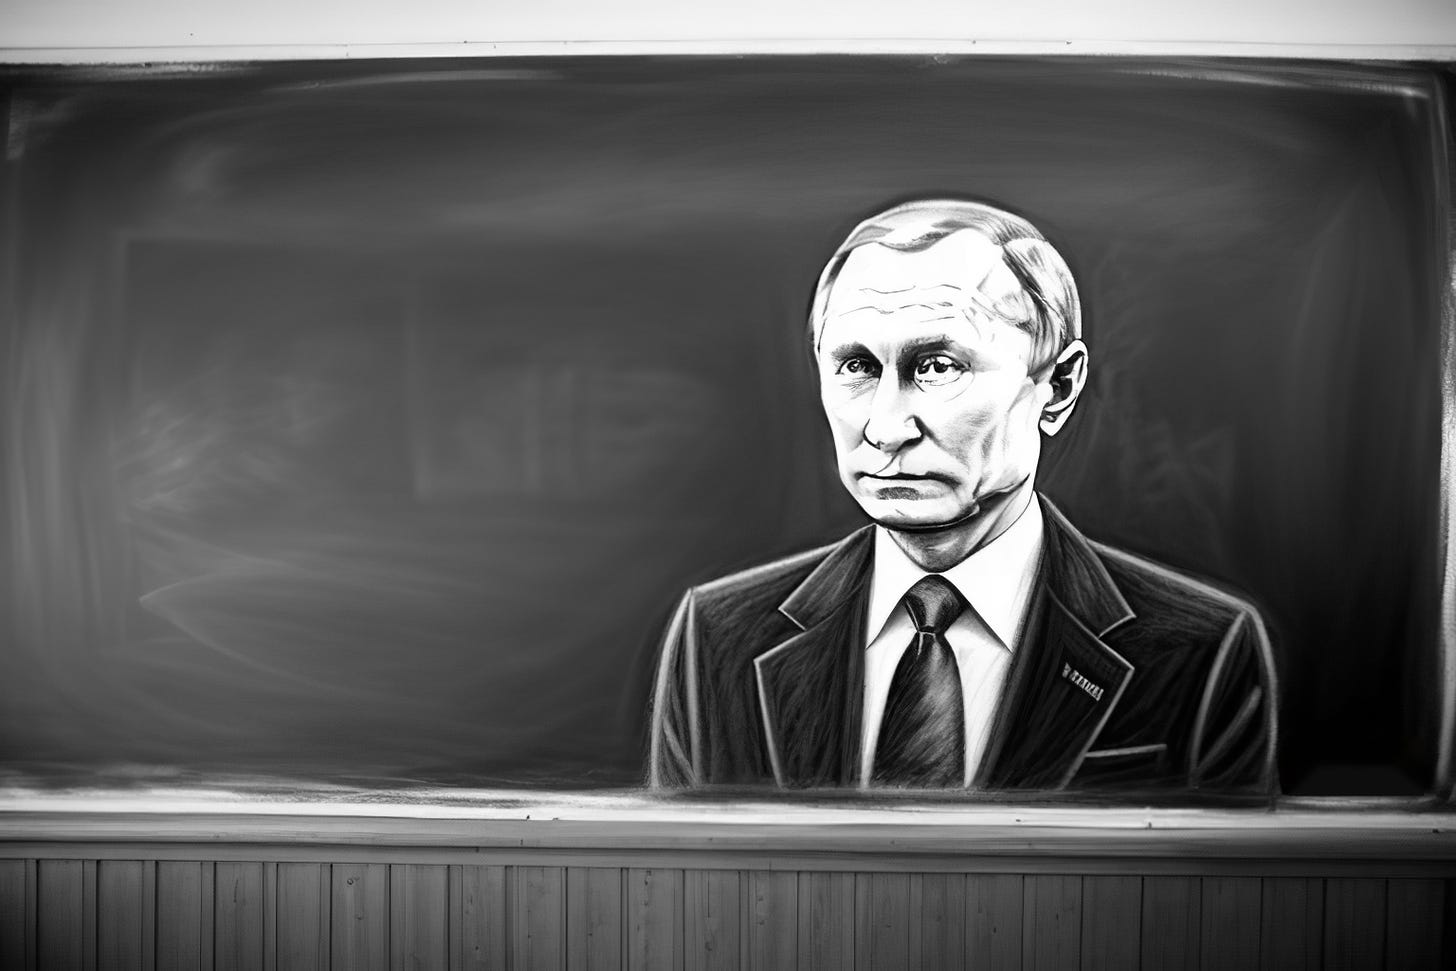 Putin depicted as a detailed chalk drawing on a chalkboard. The image is black and white."